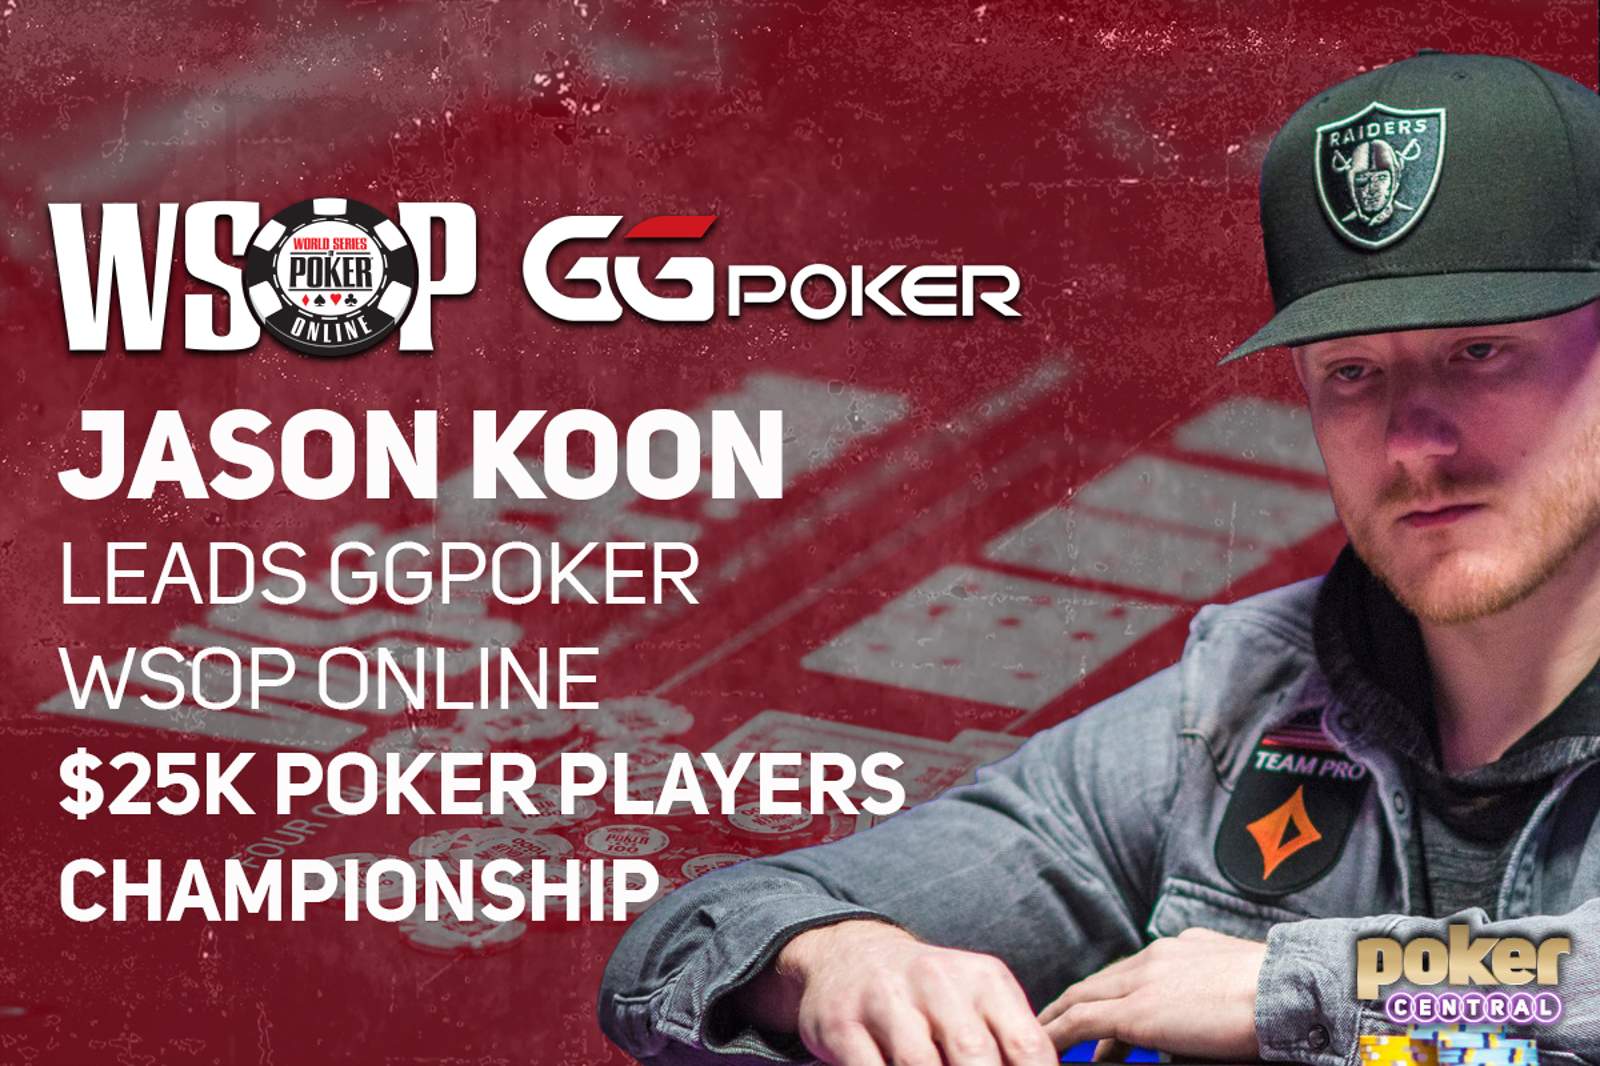 GGPoker WSOP Online $25K POKER PLAYERS CHAMPIONSHIP Reaches Final Table - Continues Saturday, August 29